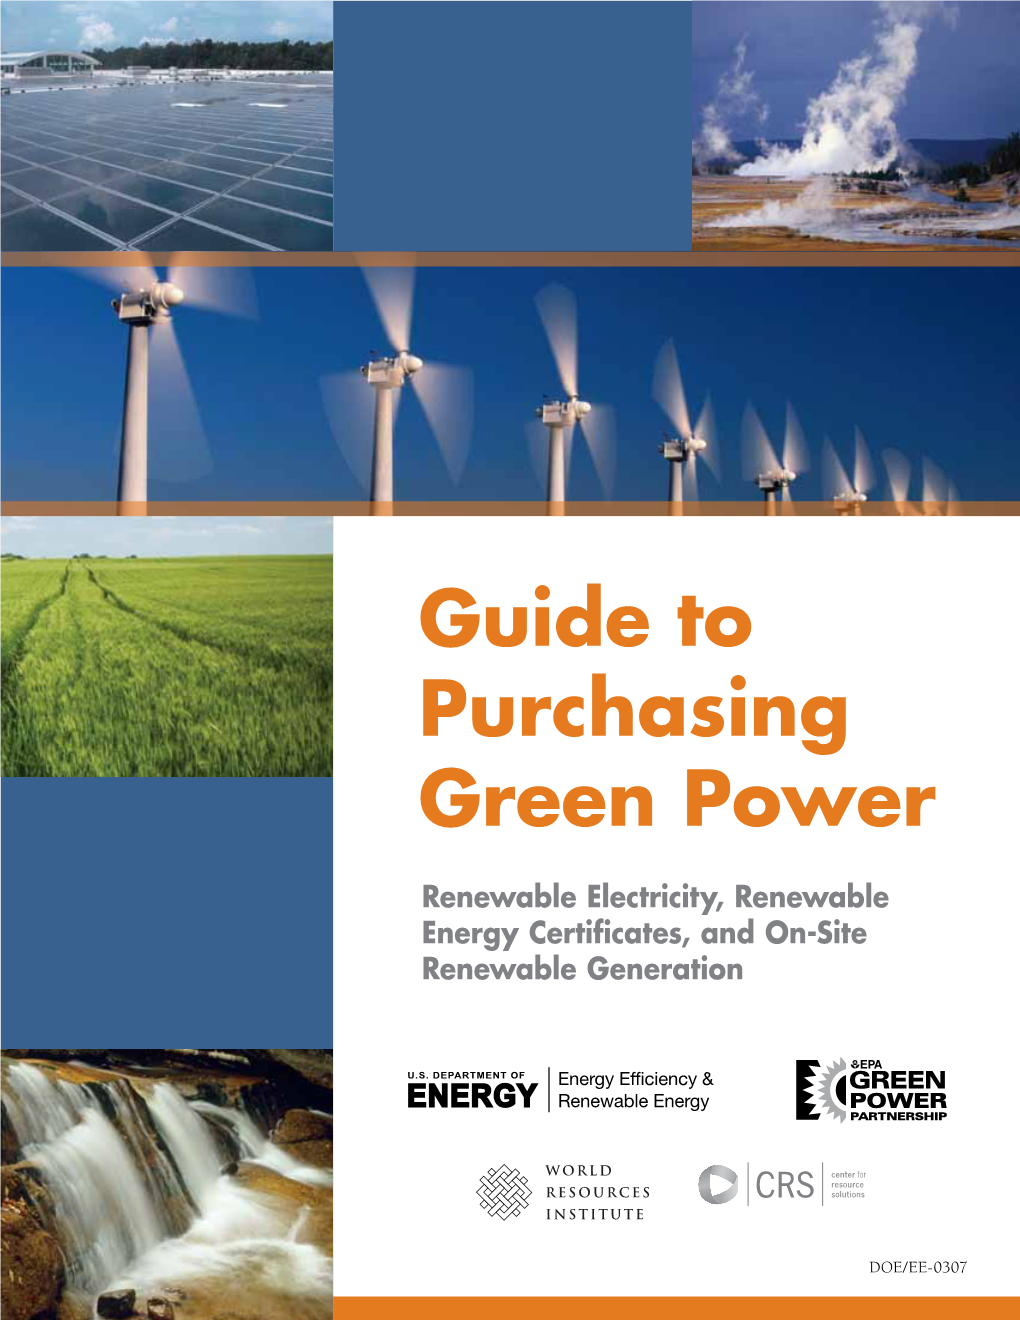 Guide to Purchasing Green Power